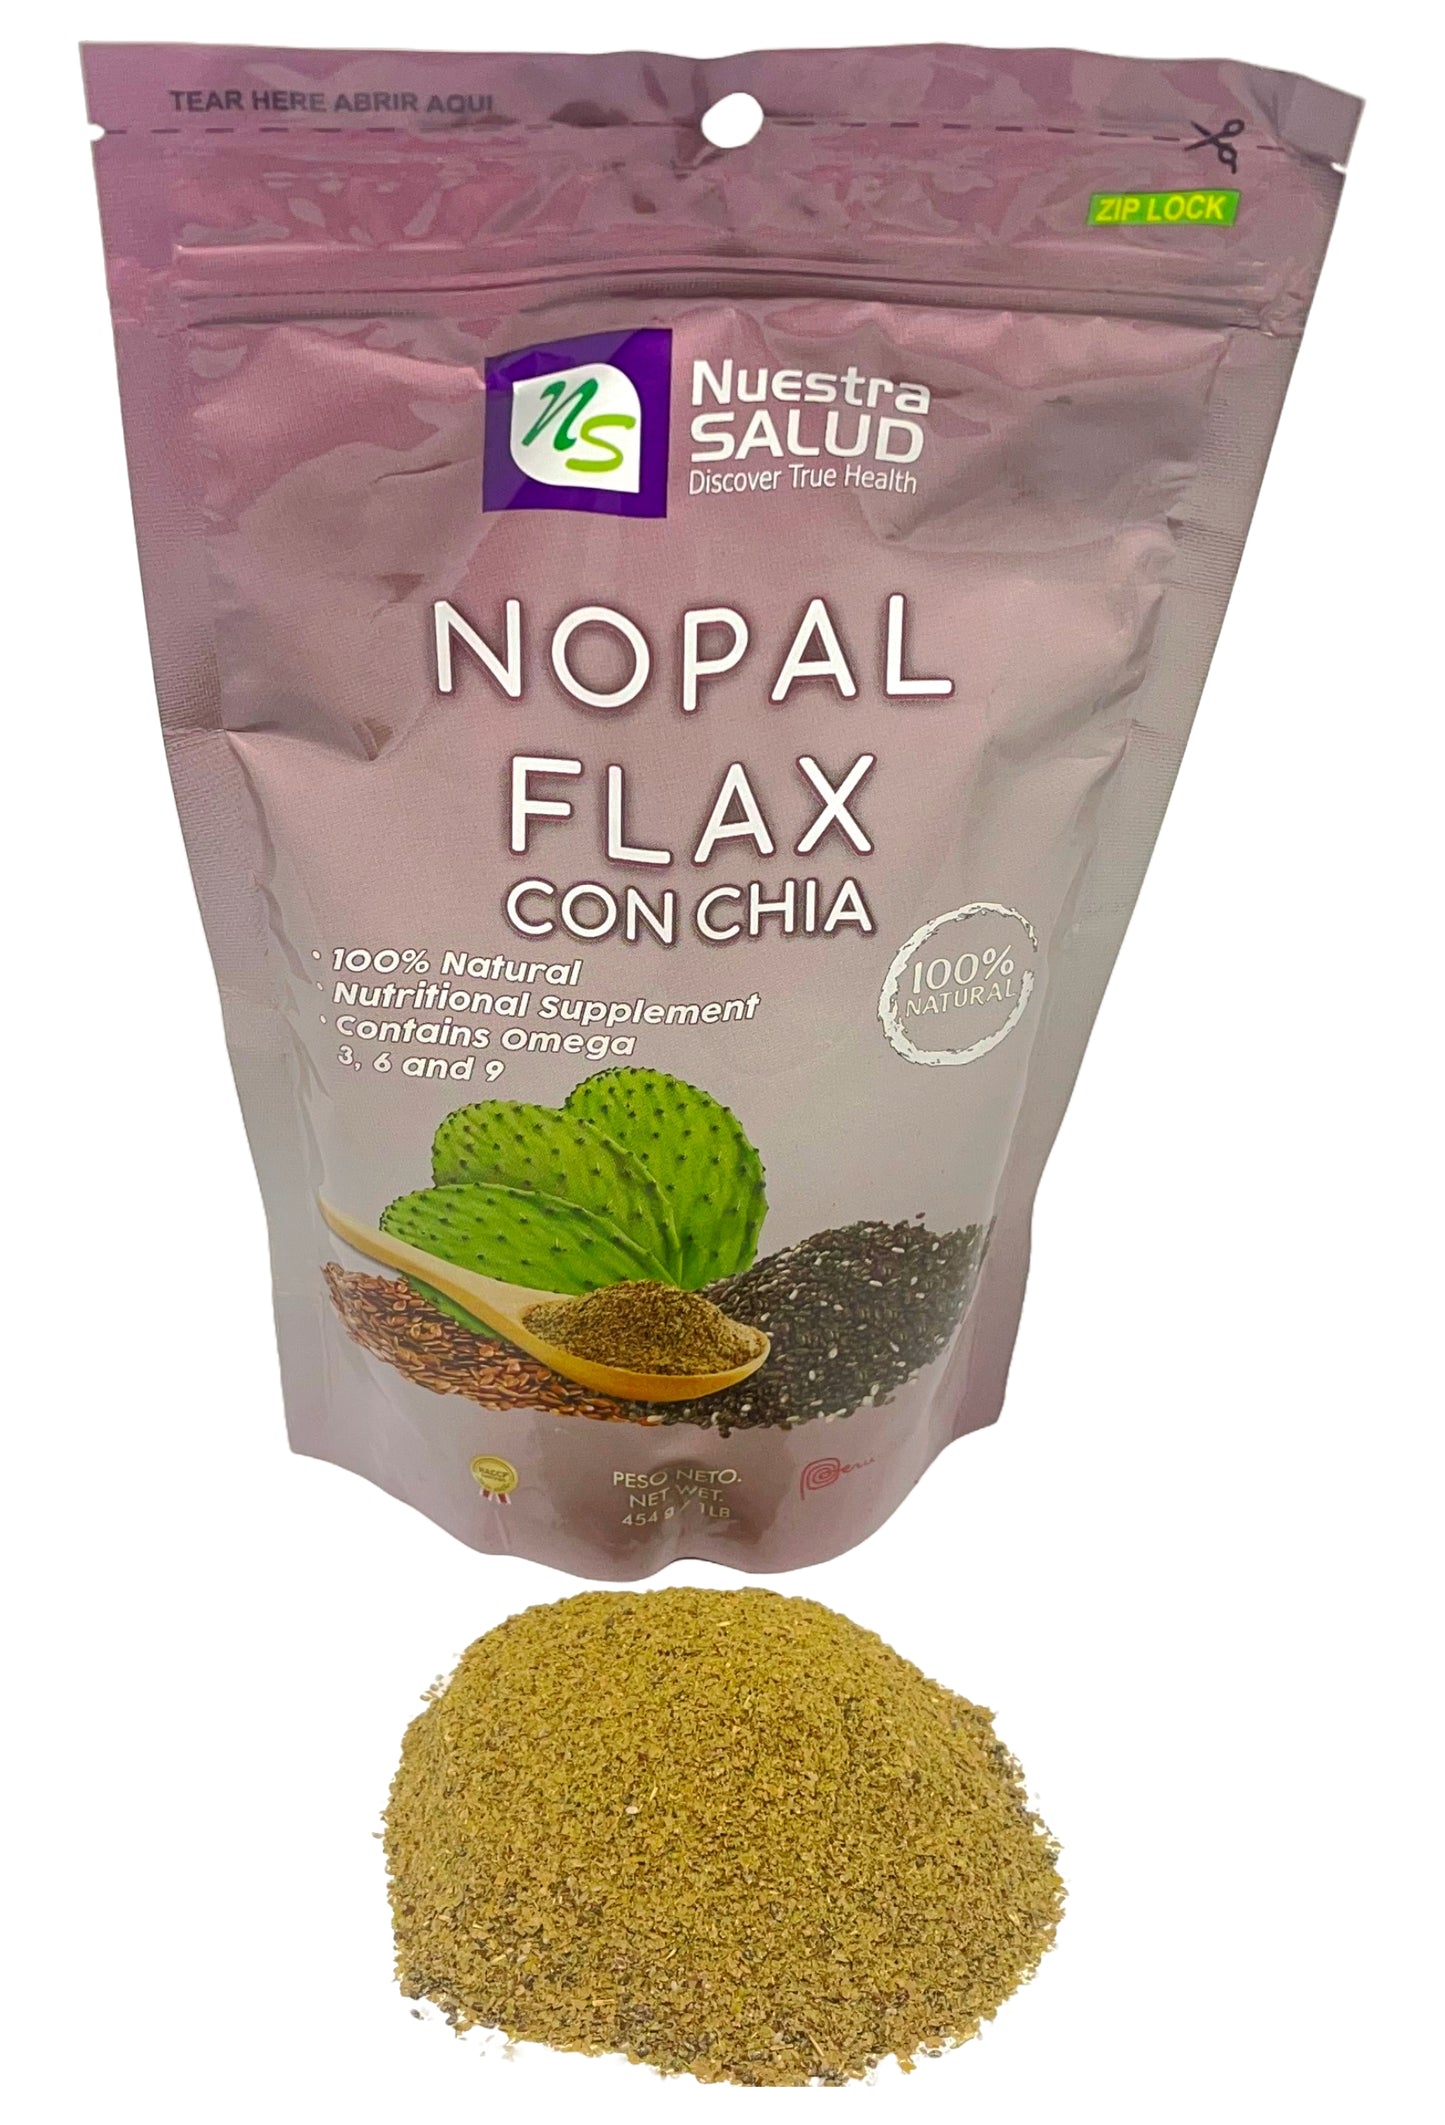 Nopal Flax Chia Seed Plus Flaxseed Colon Cleanser (454g)